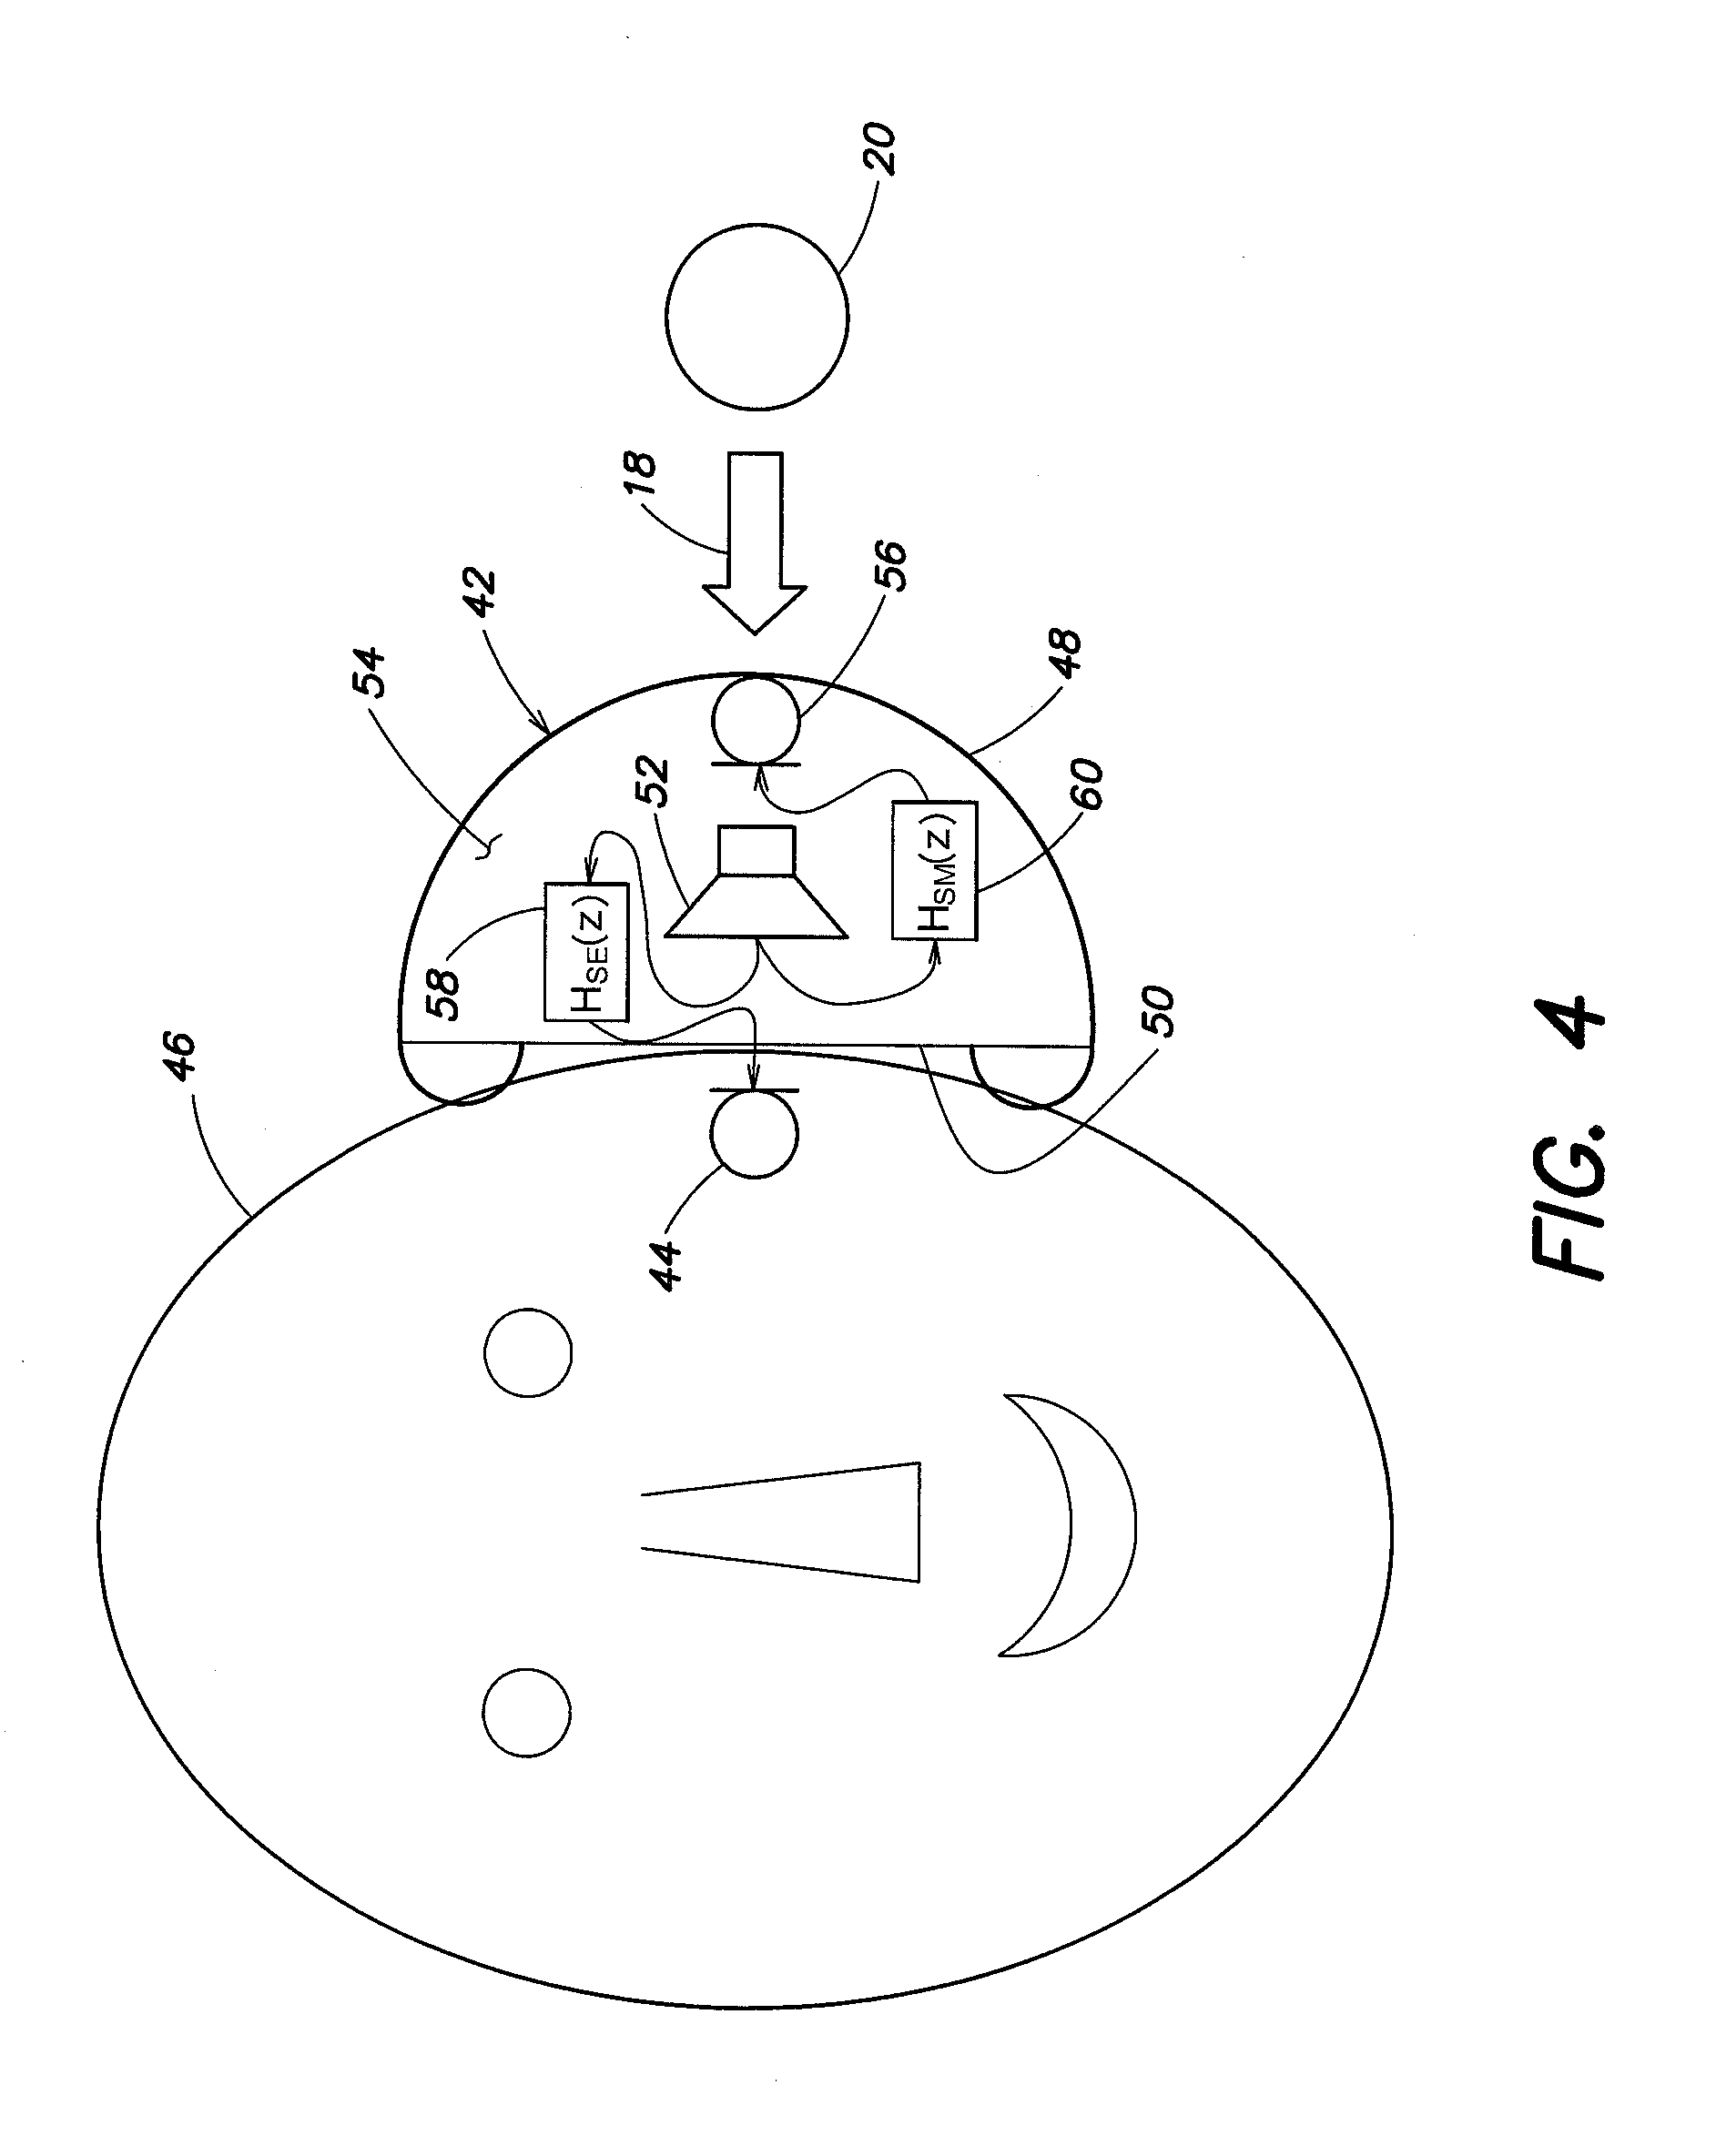 Active noise reduction system